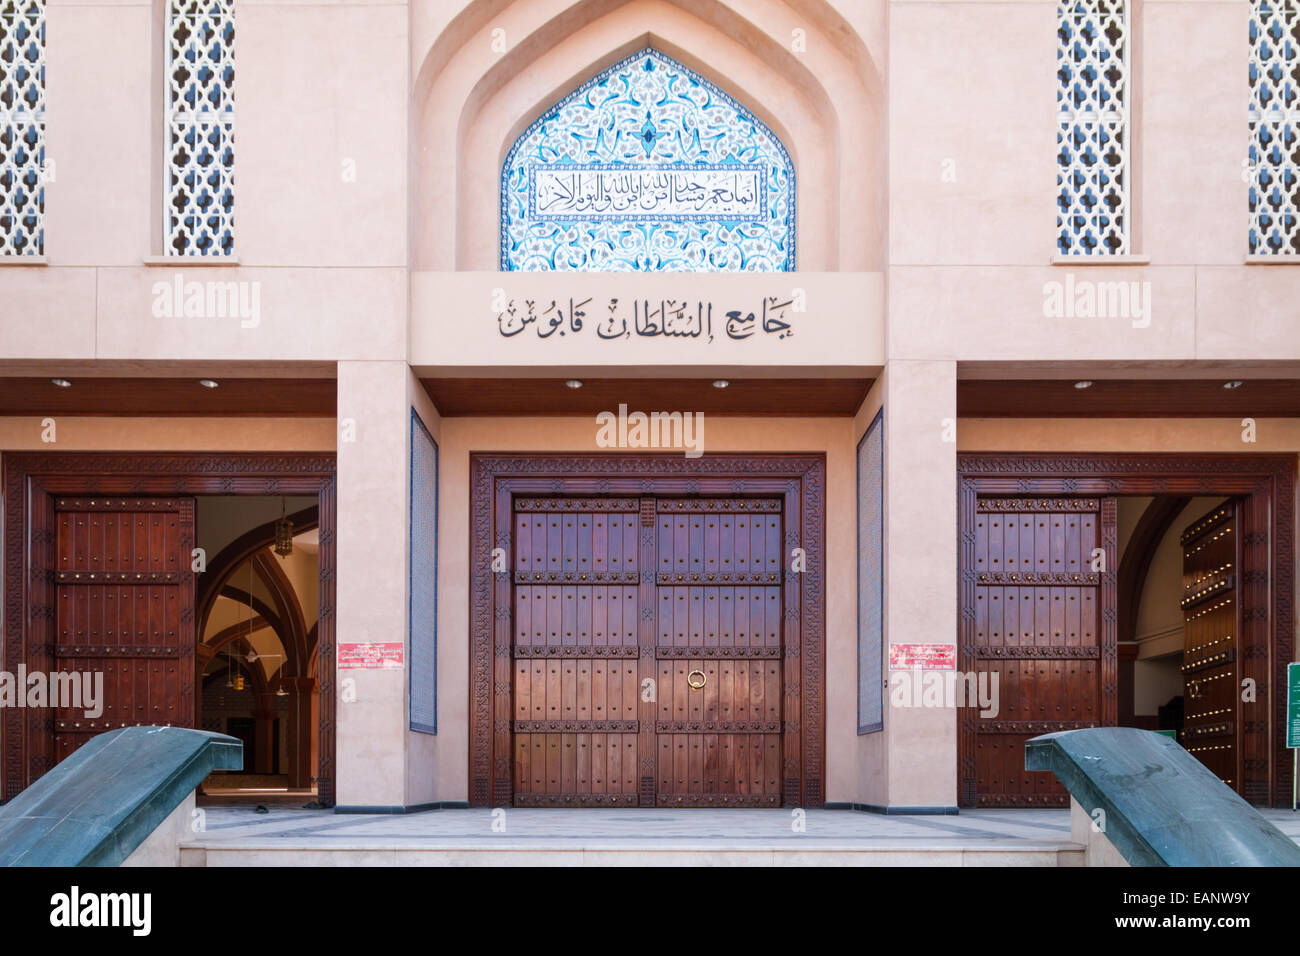 Entrance to mosque in Nizwa, the ancient capital of Oman Stock Photo